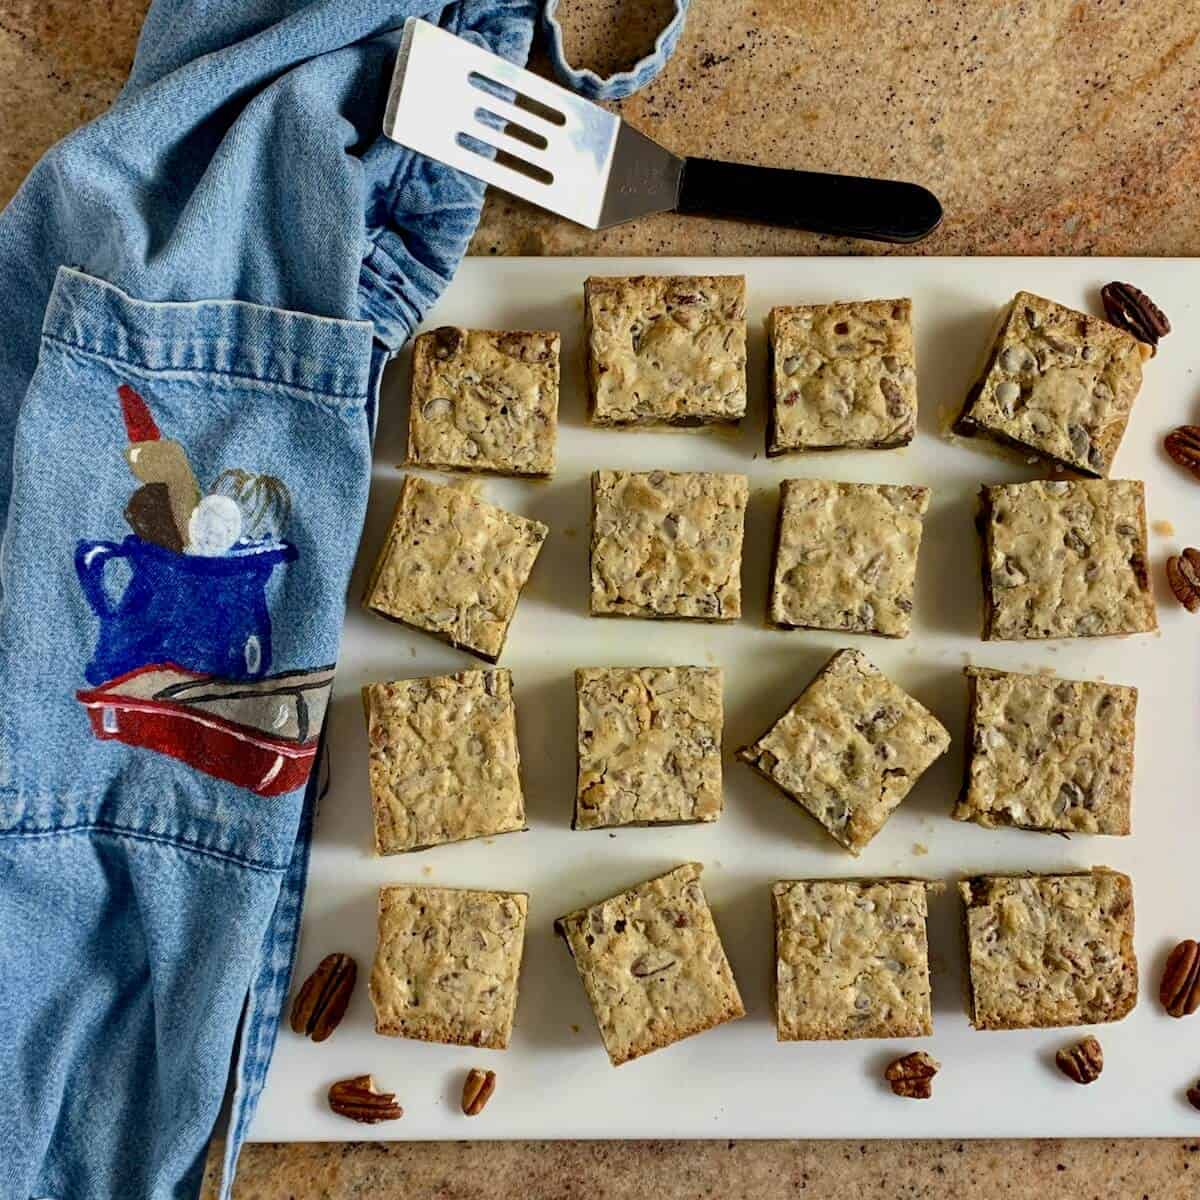 Pecan bars on a cutting board in a random pattern with a denim apron, pecans, and a small spatula from overhead.